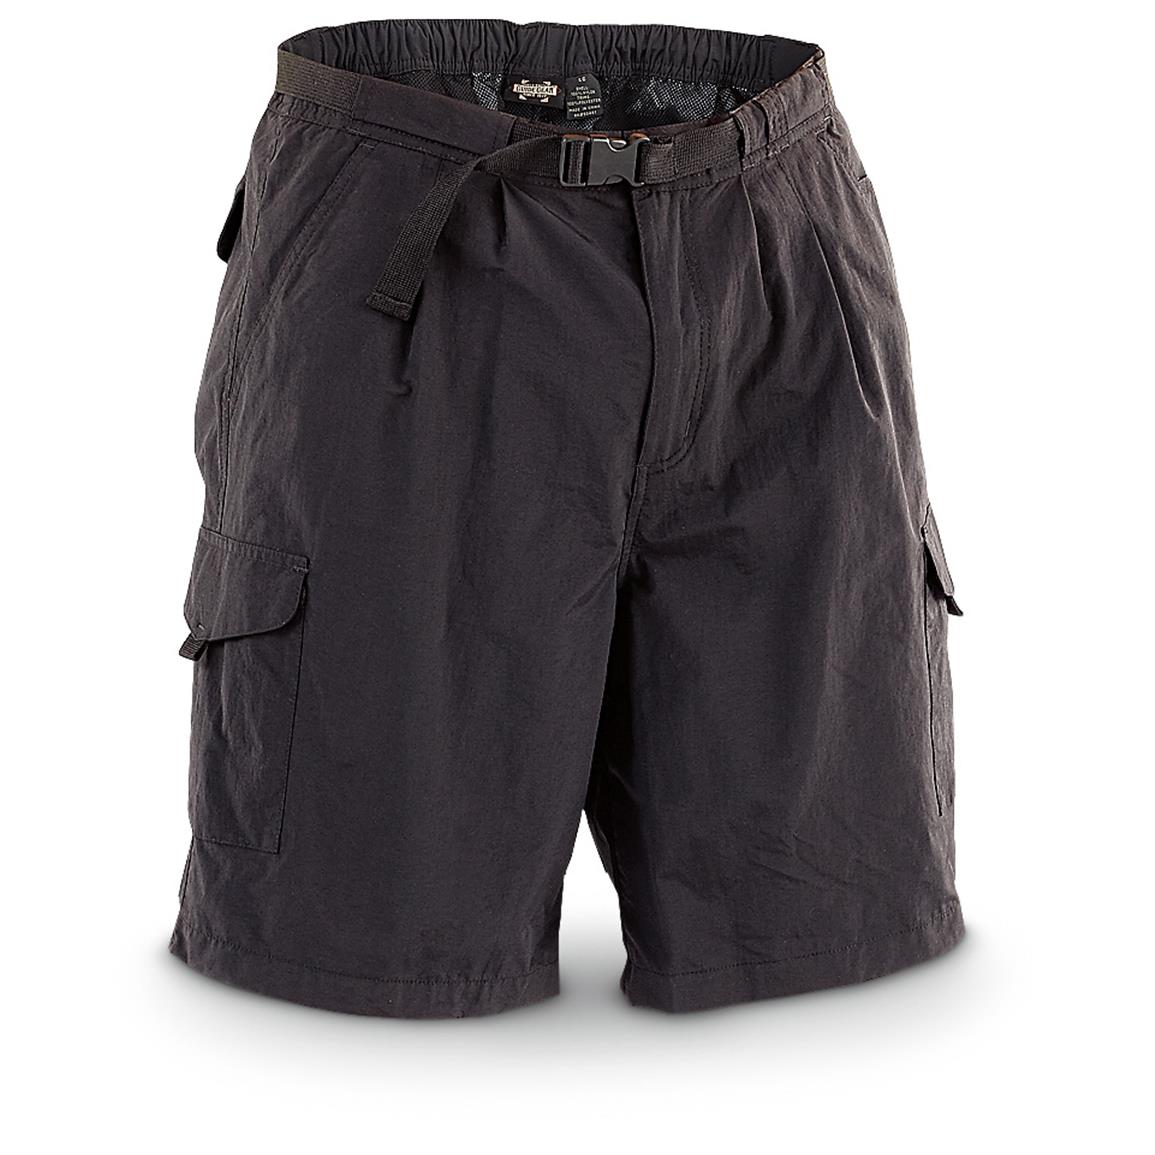 Cargo River Shorts, 3 Pairs - 660227, Shorts at Sportsman's Guide